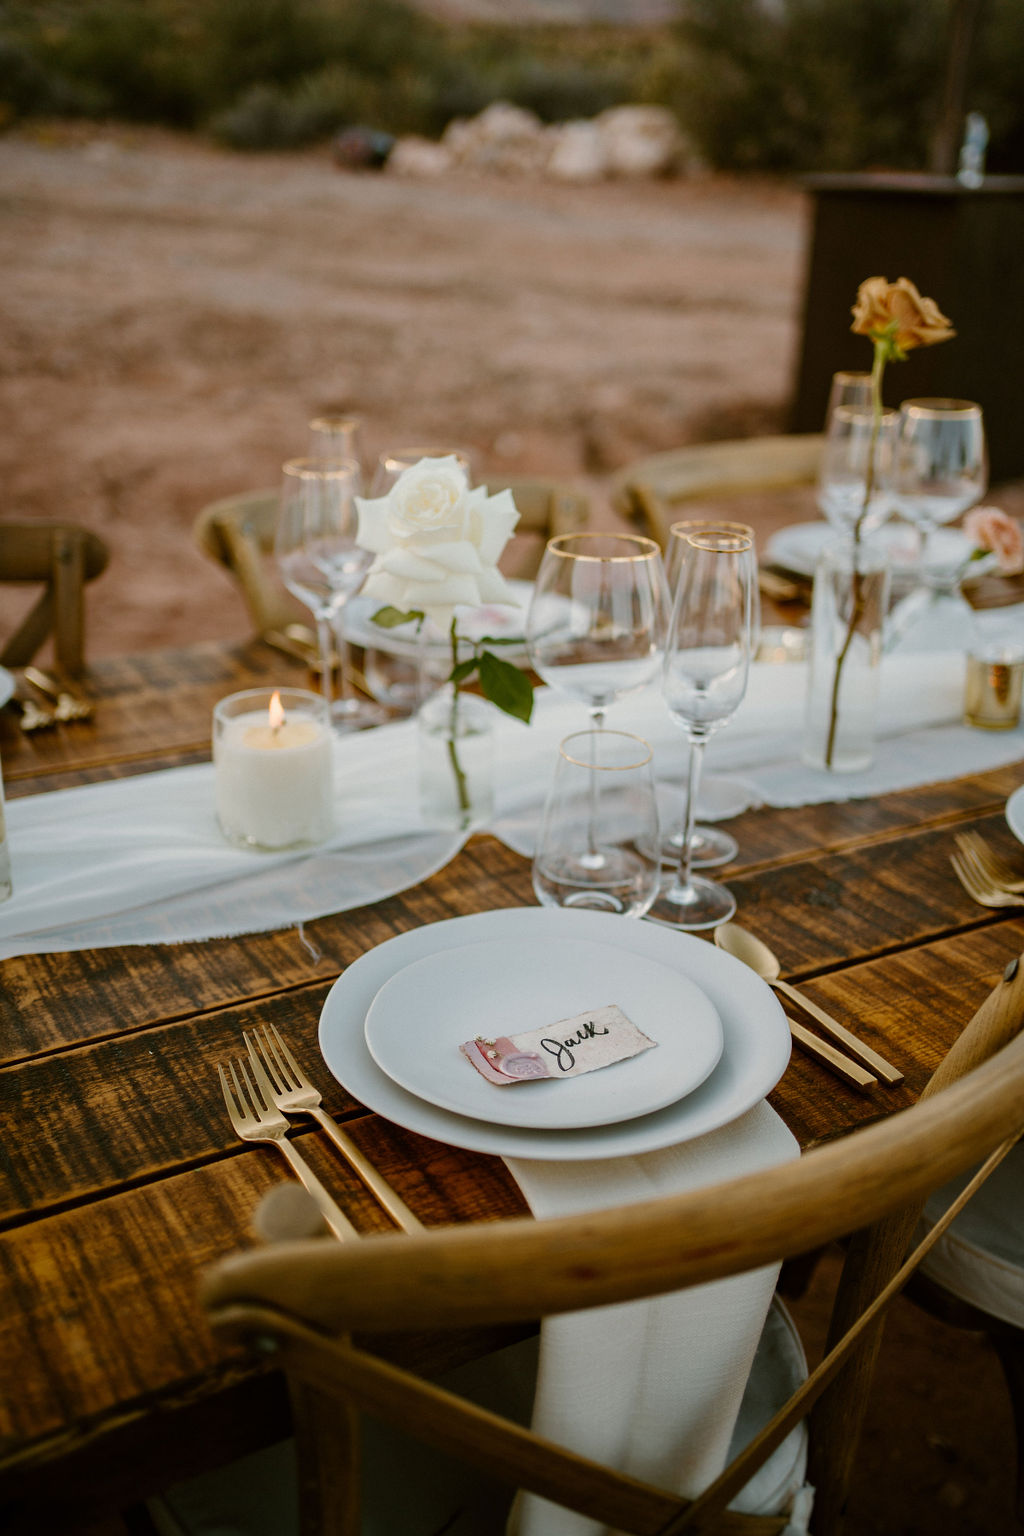 A rustic outdoor table setting with wooden chairs features a white floral centerpiece, a lit candle, wine glasses, and place settings including a plate with a name card at a california wedding venue